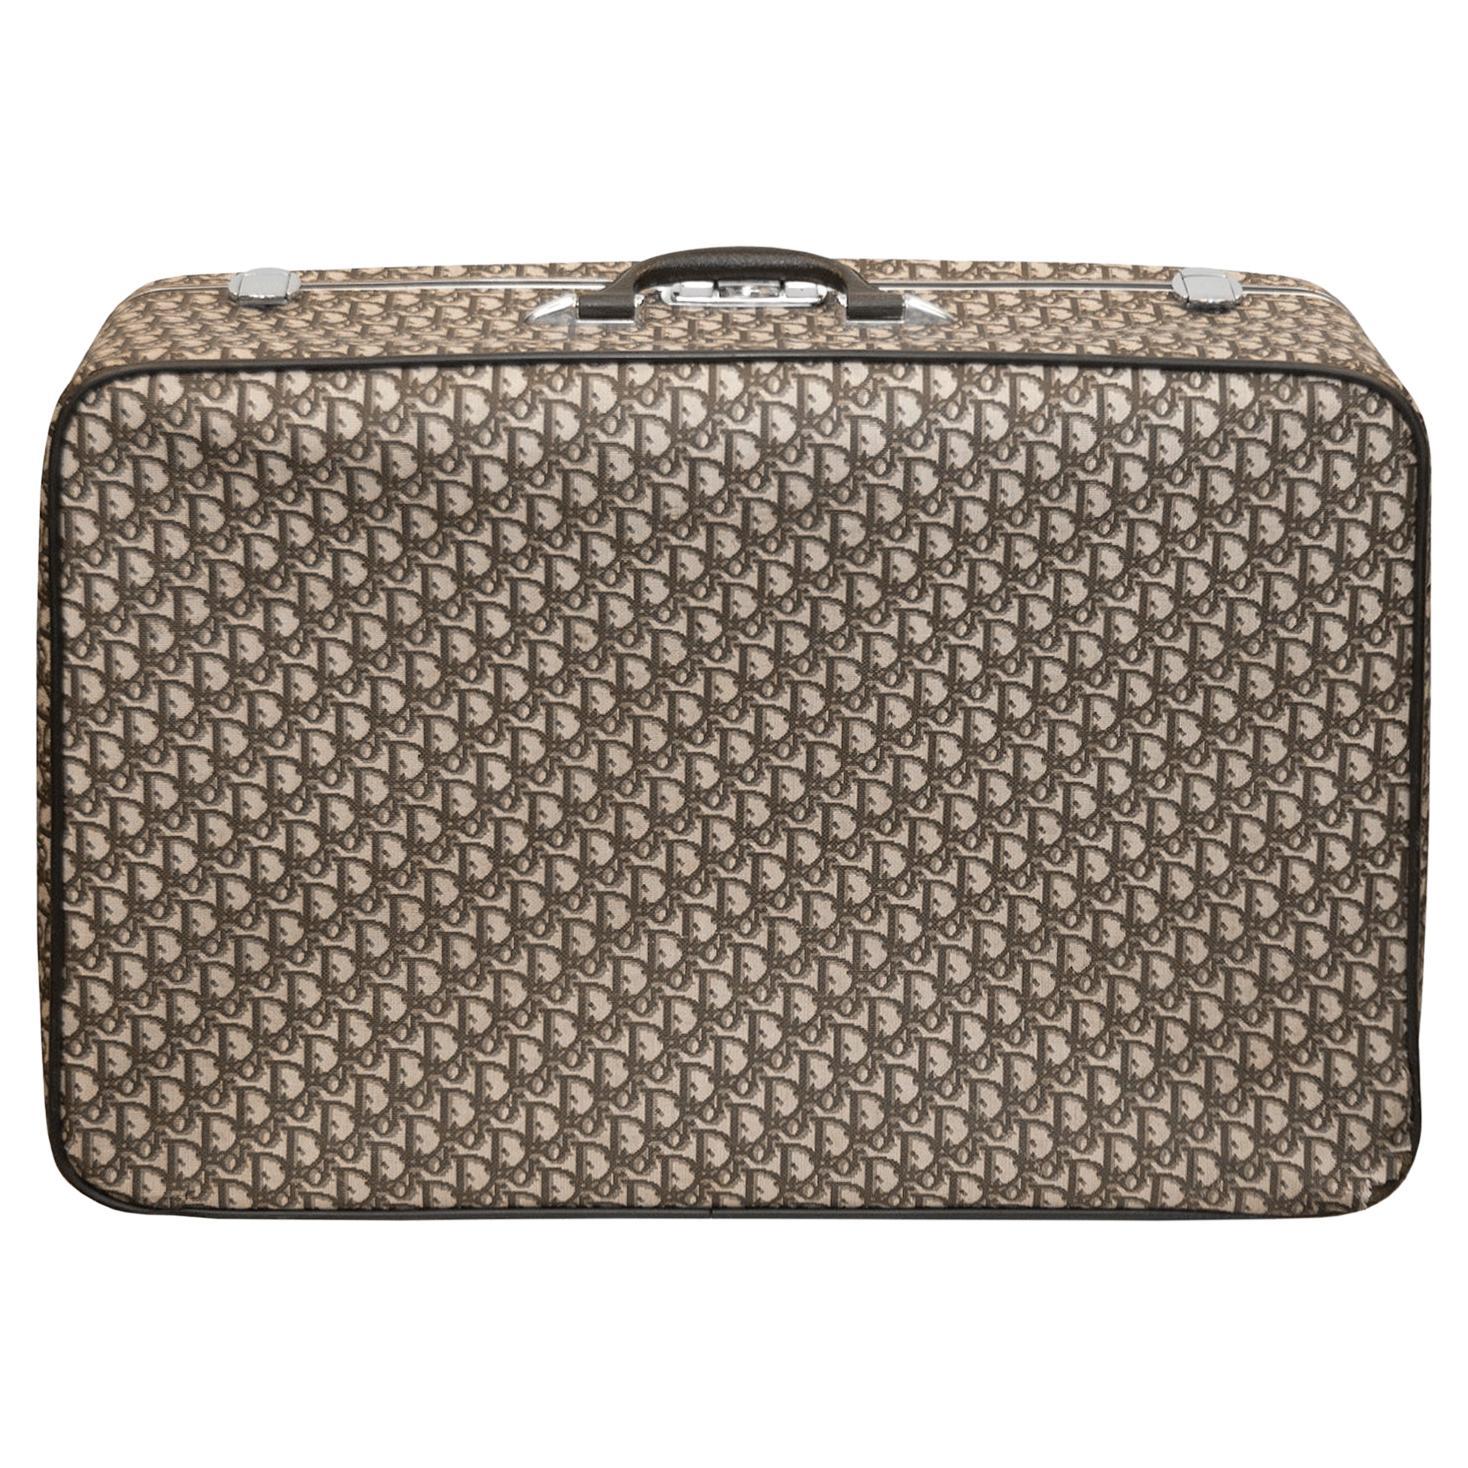 1960s Christian Dior Large Monogram Suitcase  For Sale